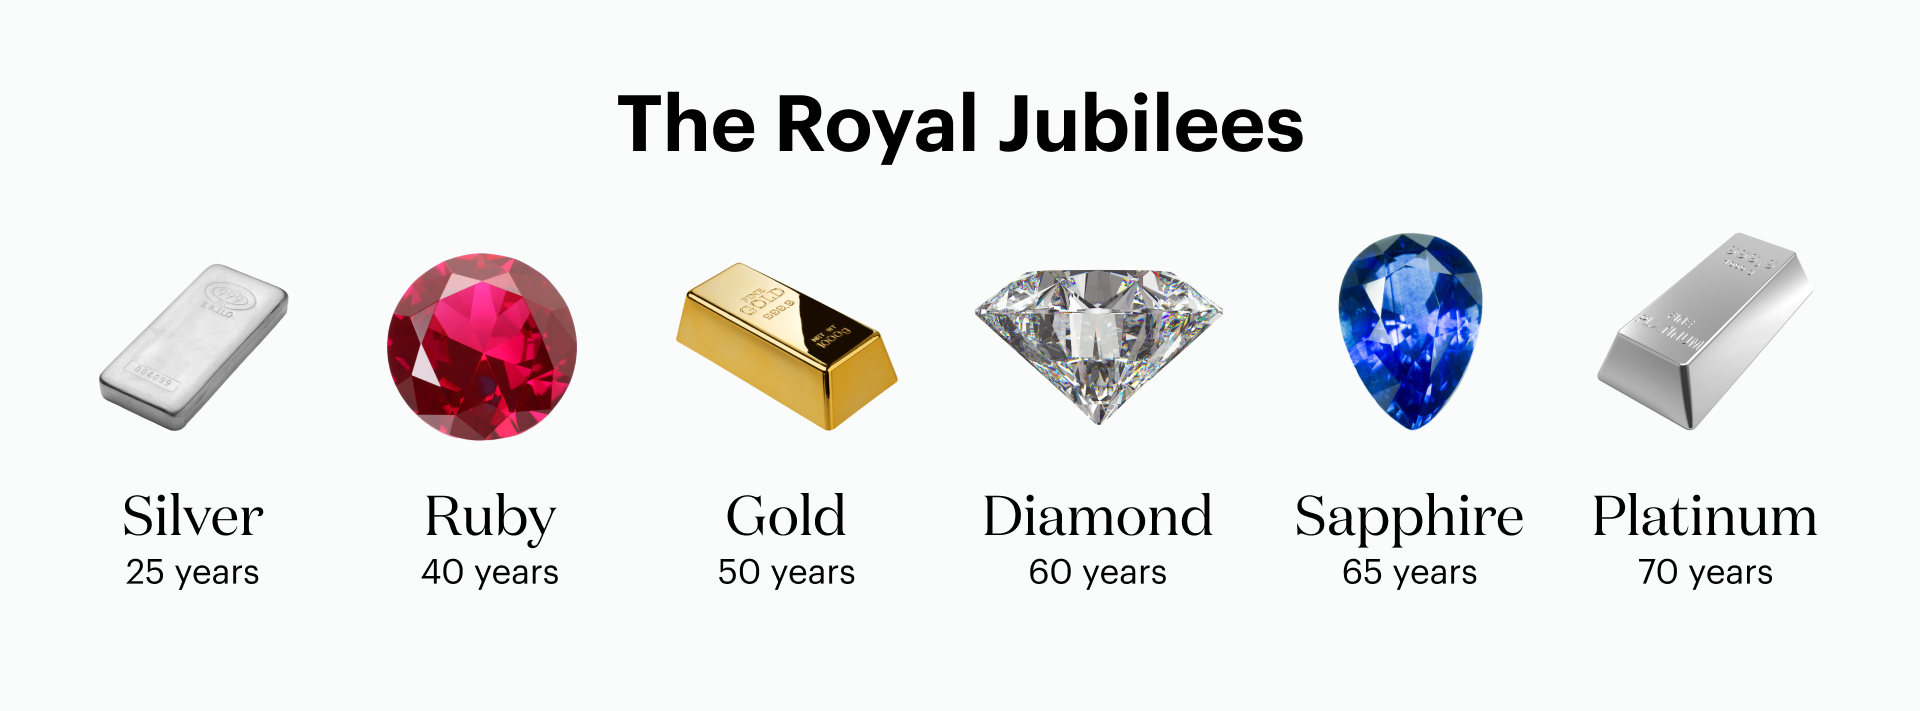 The Queen's Platinum Jubilee: What Is It? | theSkimm